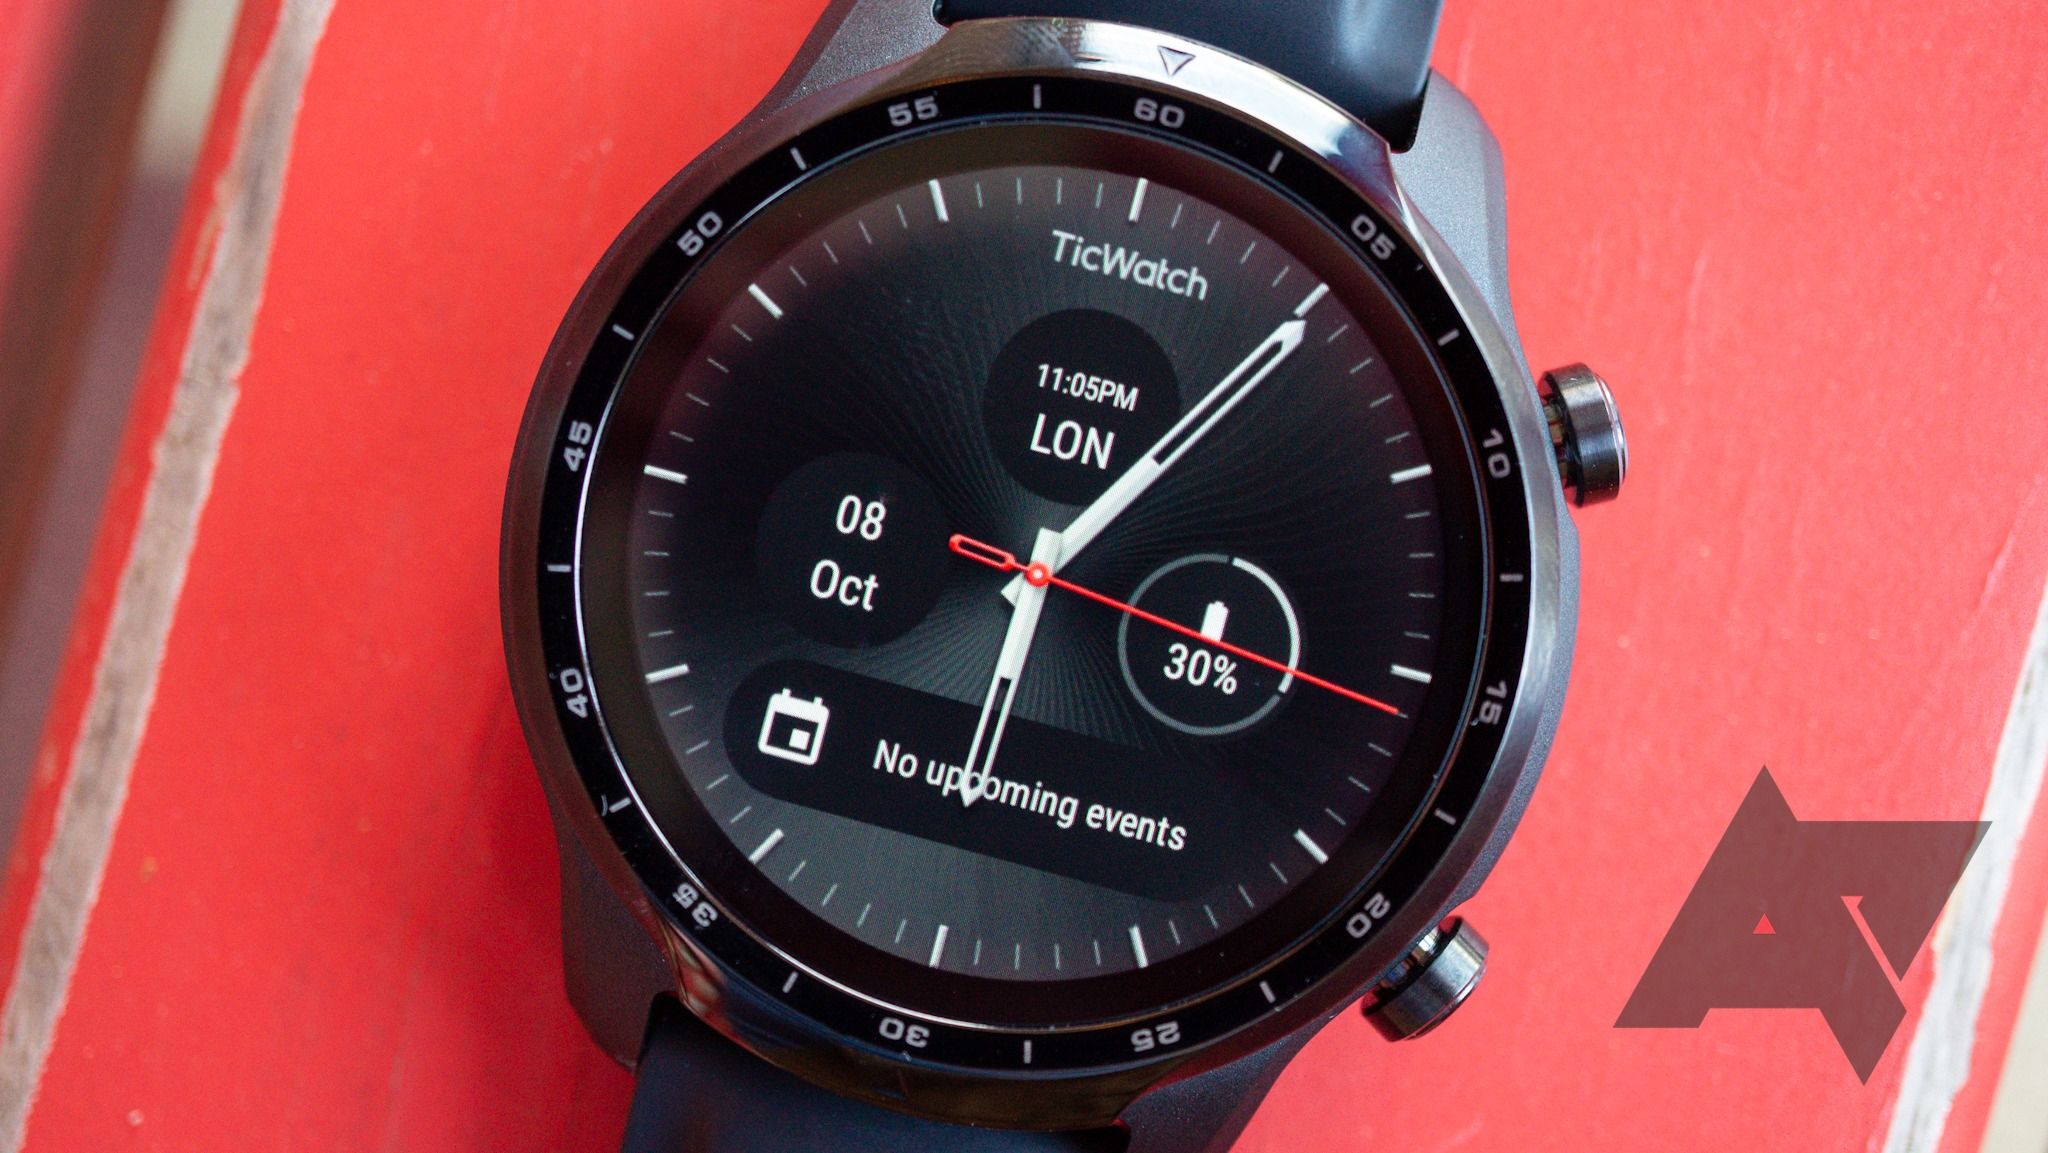 Wear OS 3.5 starts rolling out to TicWatch Pro 3 today